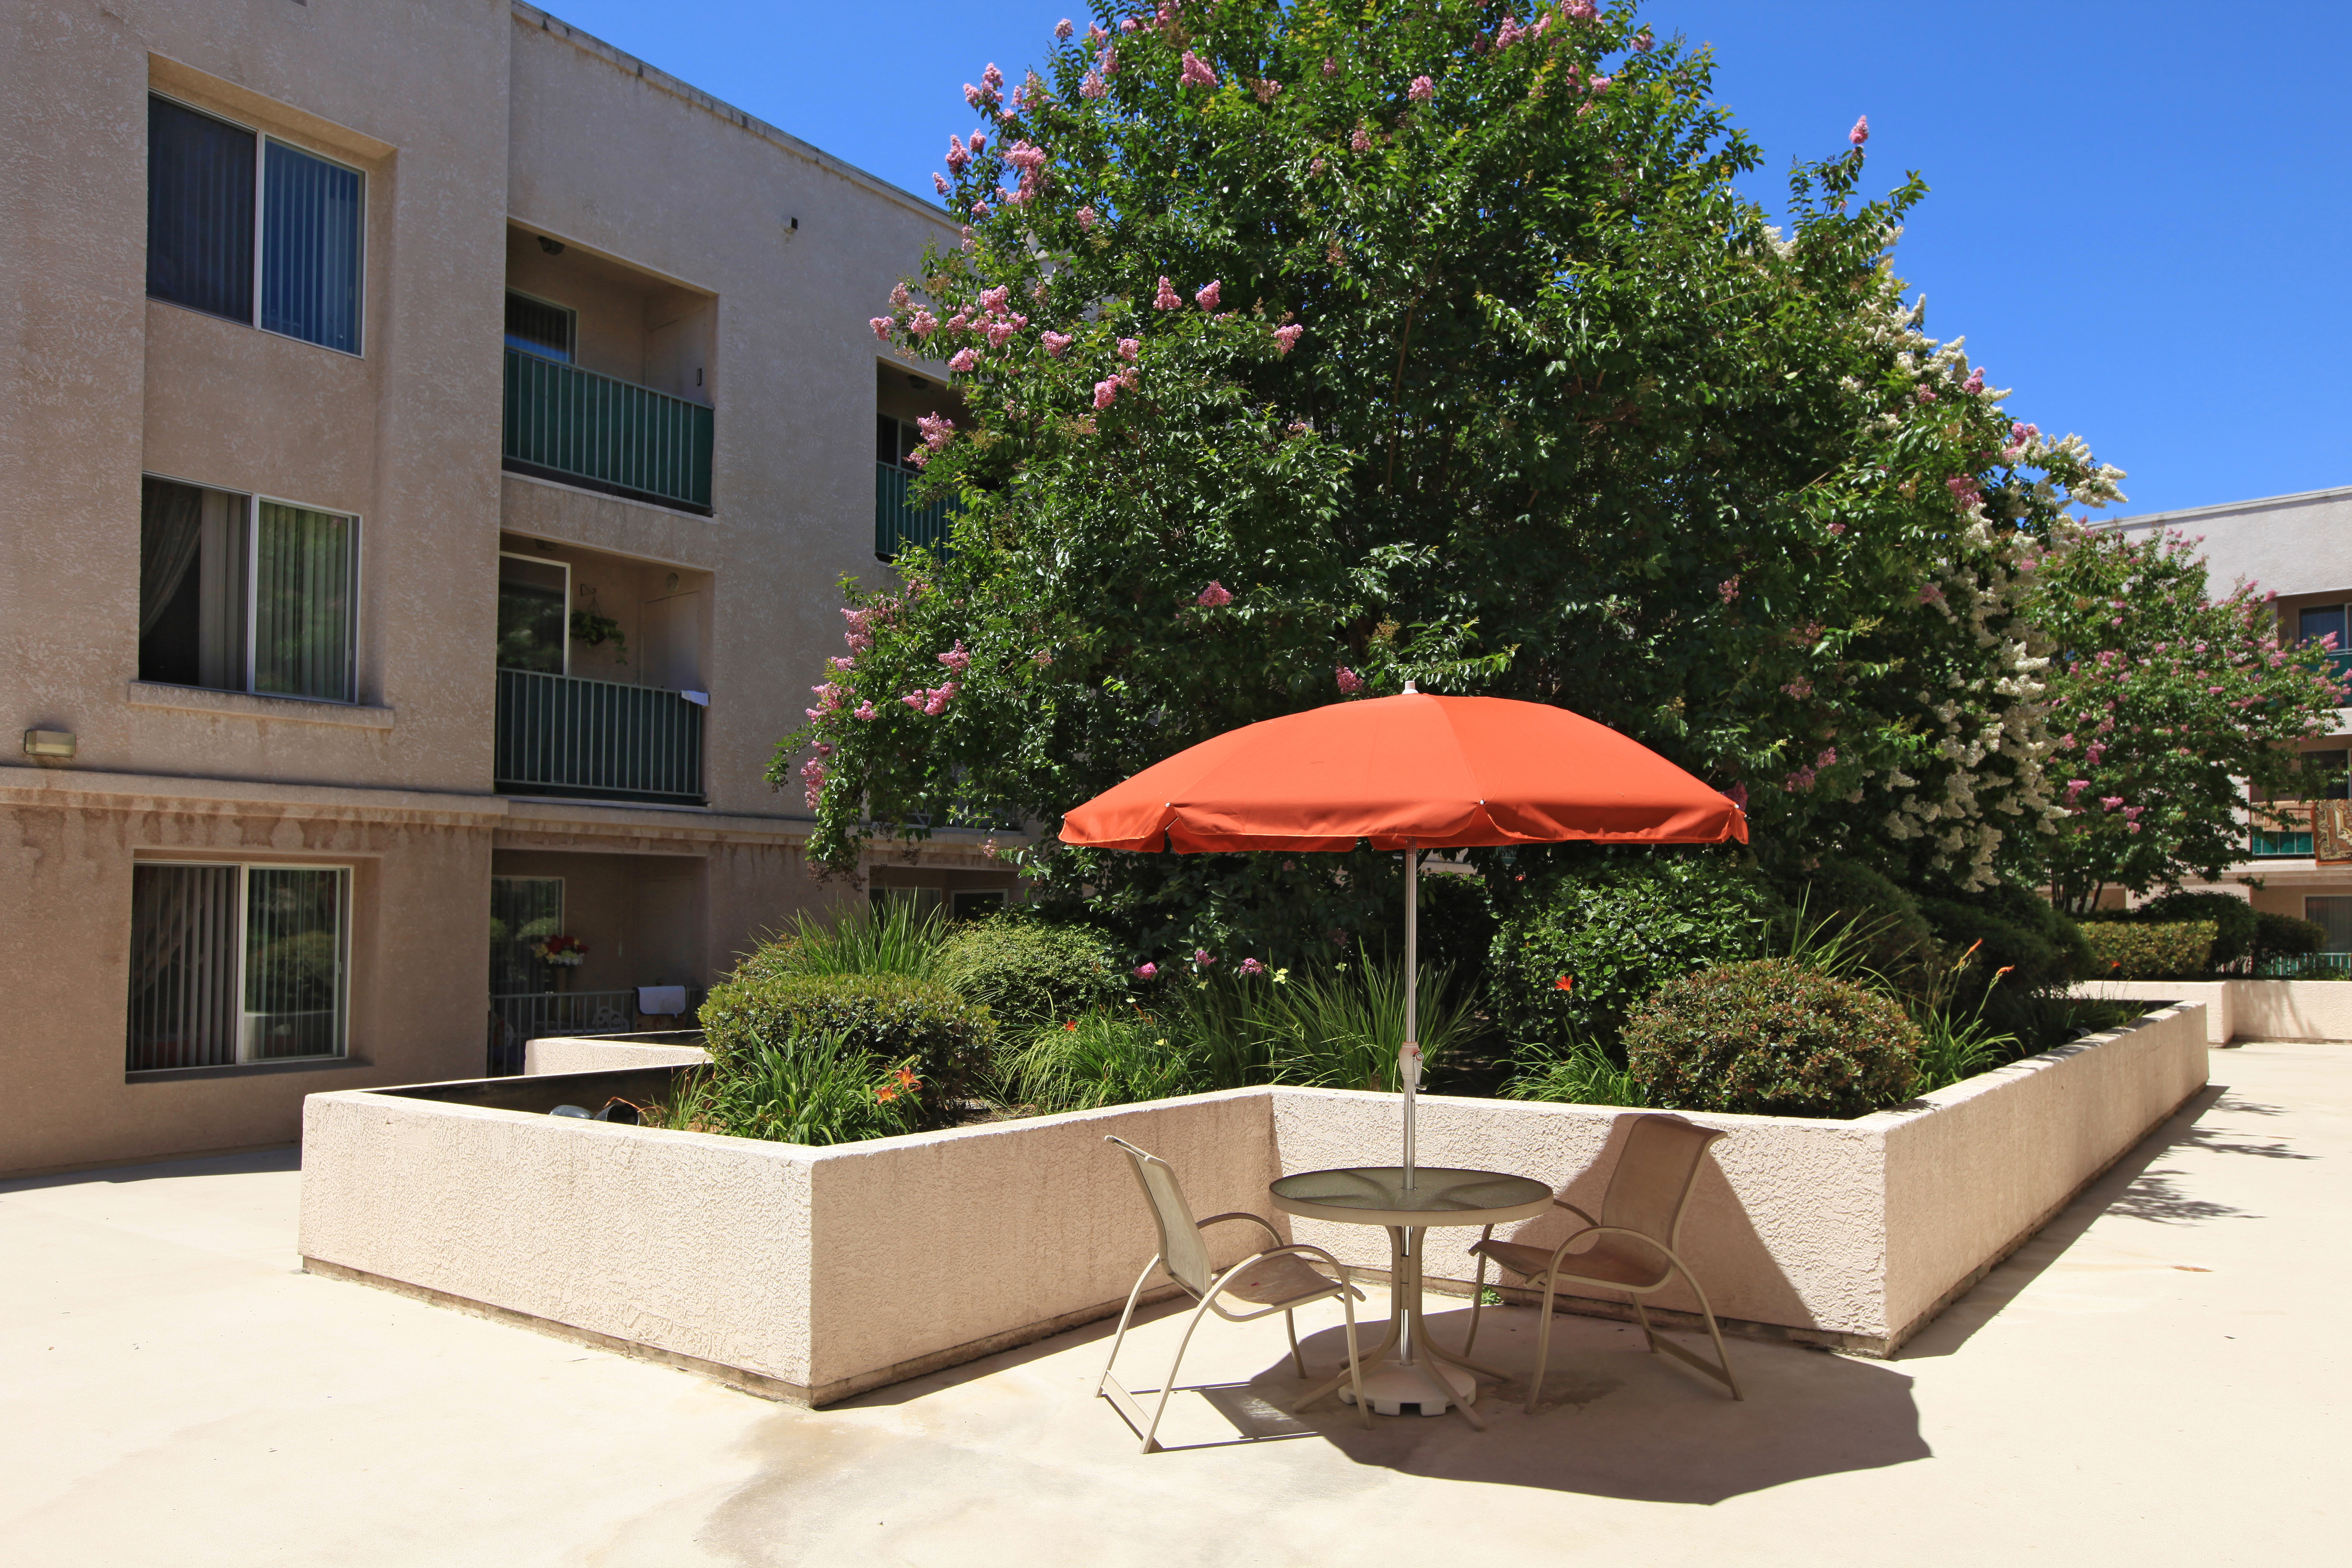 View of a courtyard, a small round table with two chairs and an orange umbrella, bushes and trees behind the table.